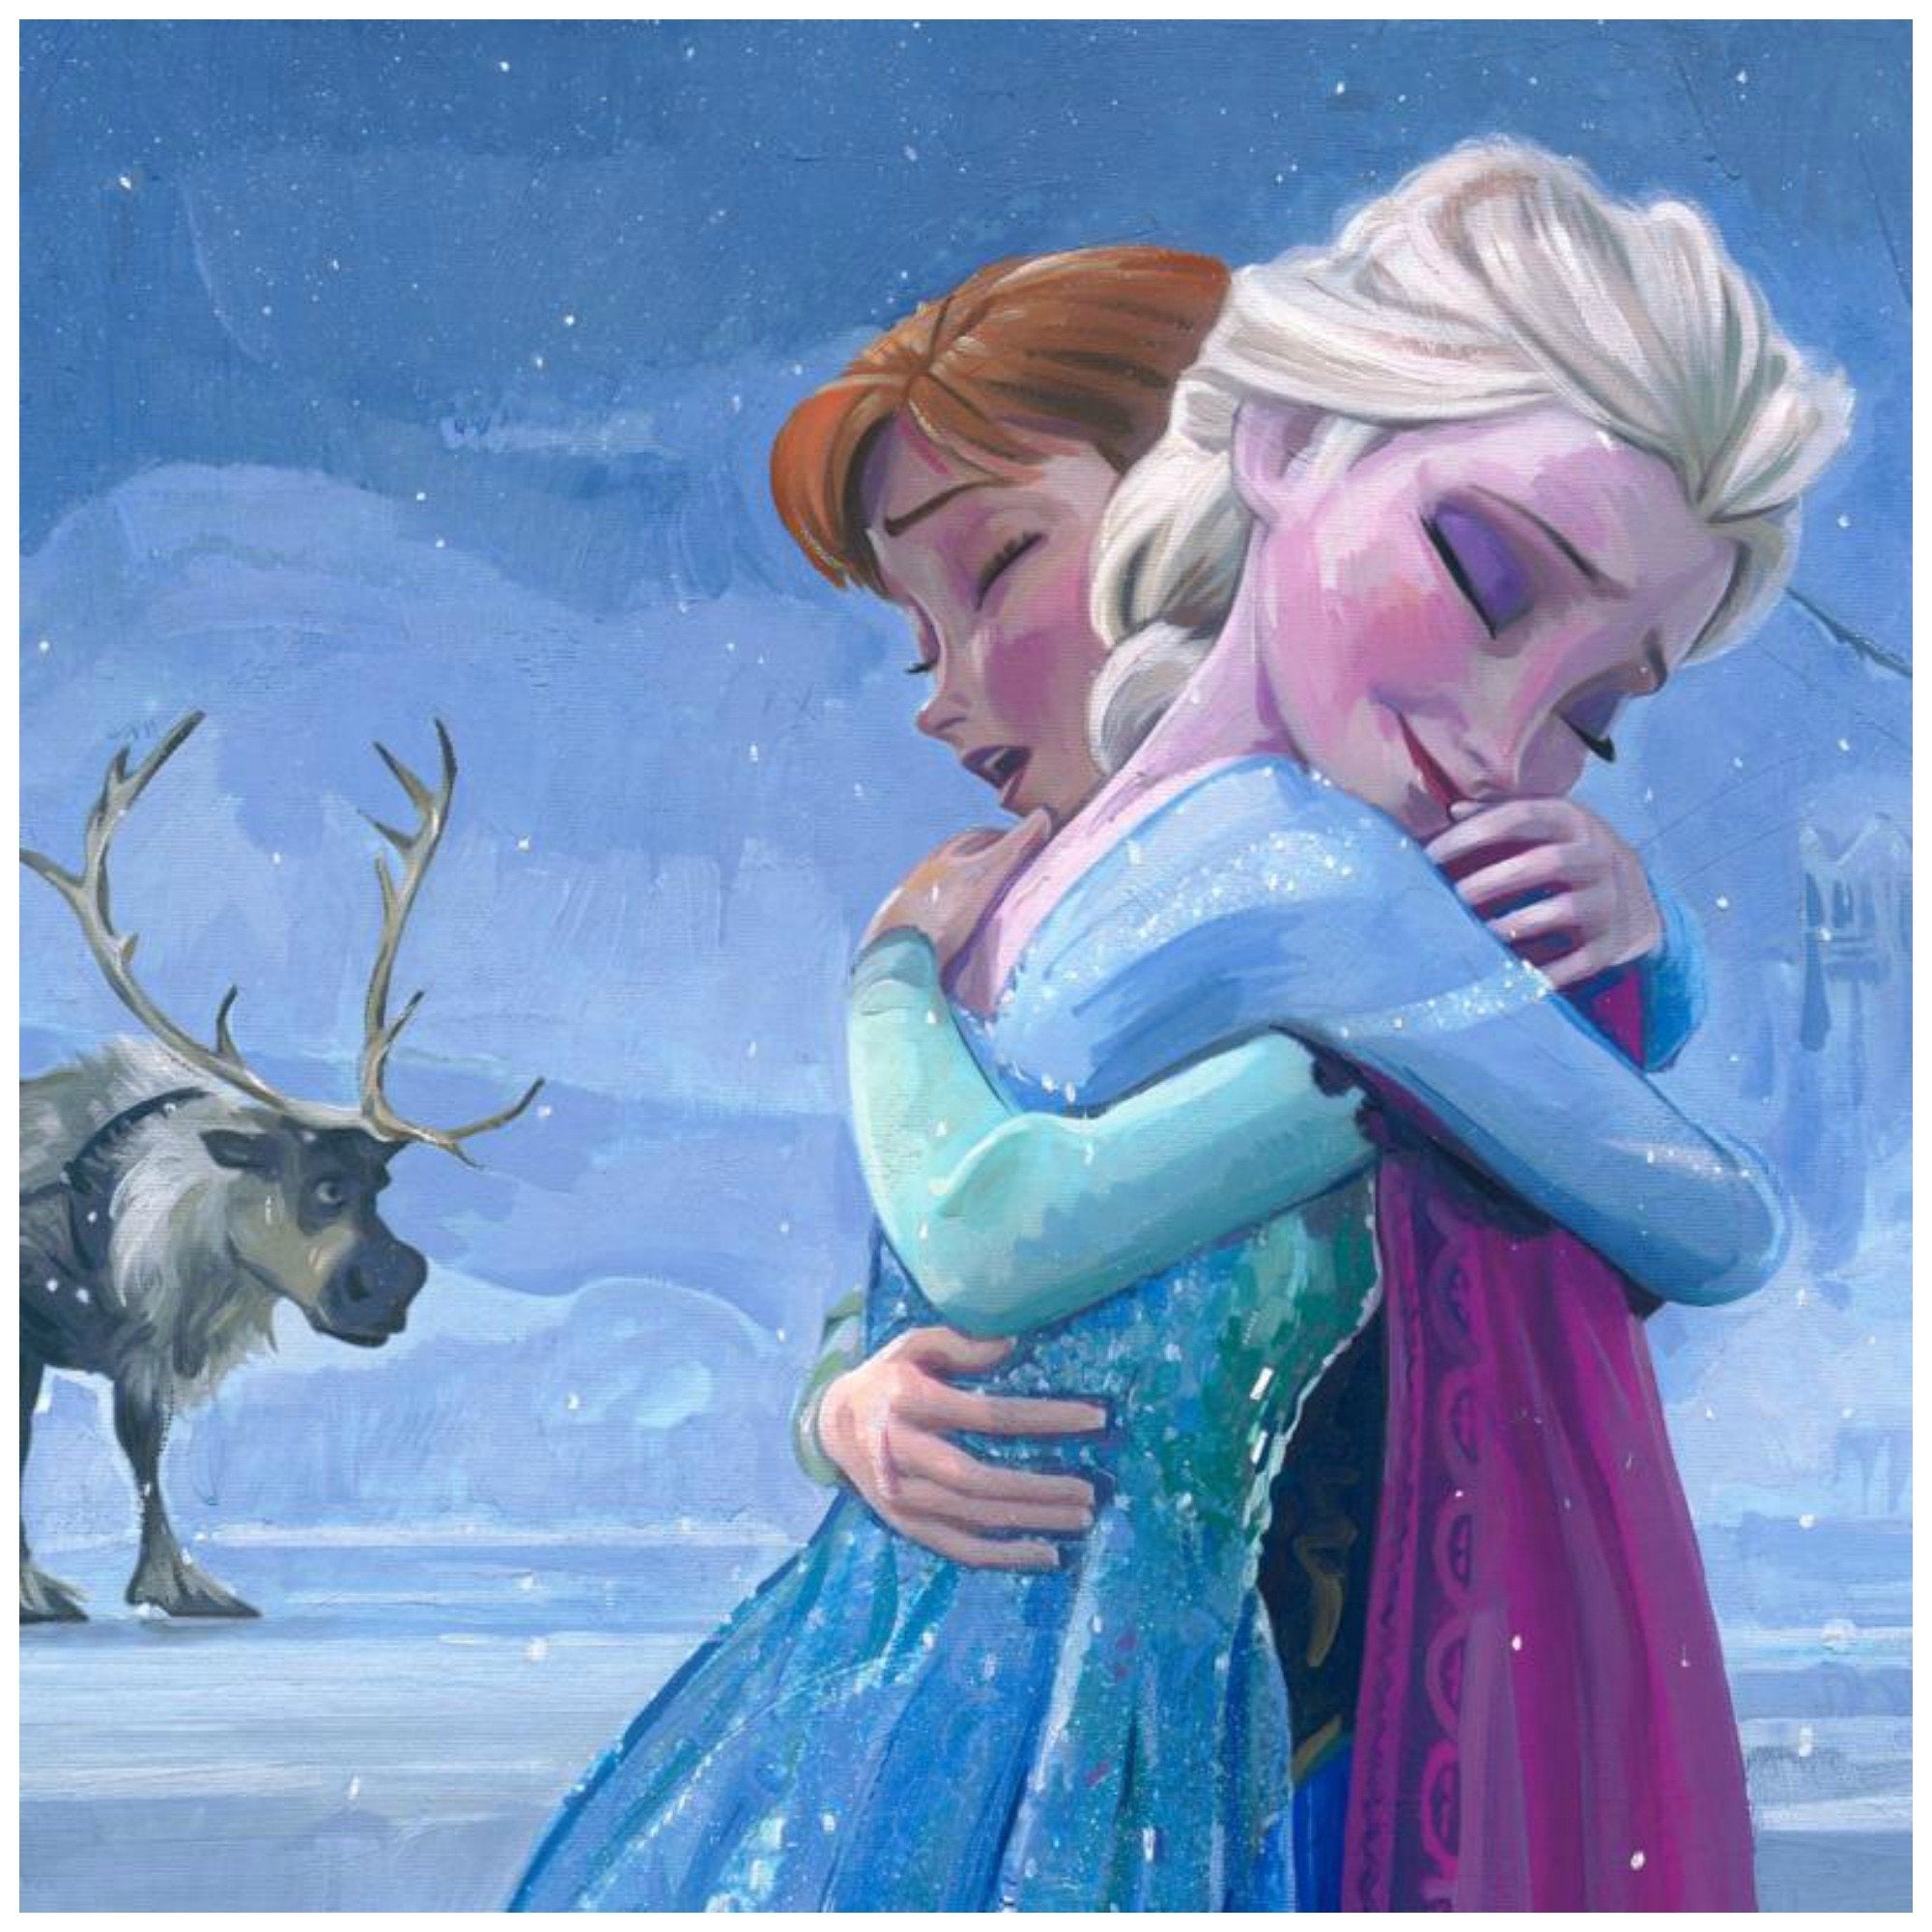 The Warmth of Love by Michelle St. Laurent.   Inspired by Disney film's "Frozen". Elsa and Anna sharing a sisterly love embrace - closeup